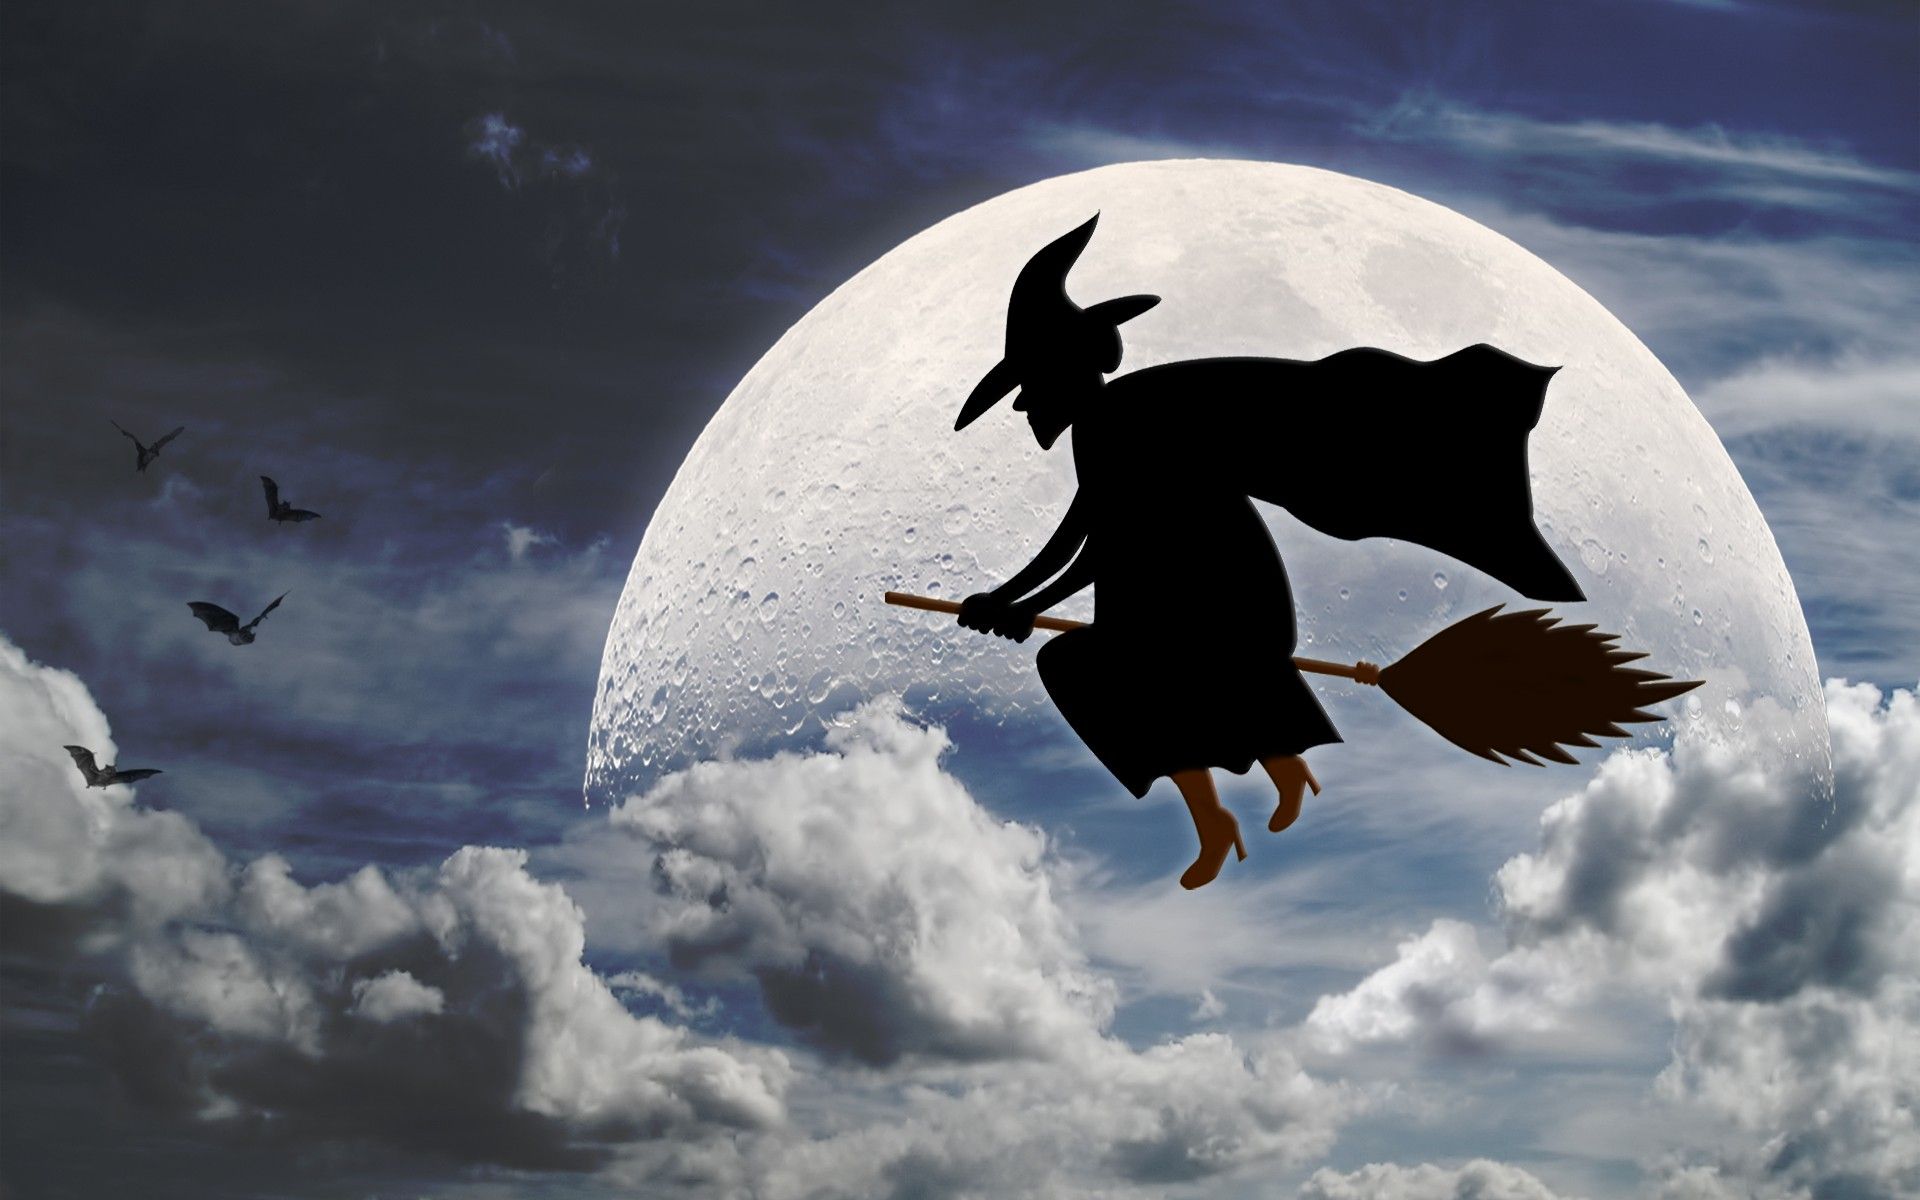 Halloween Broom Stick Witch HD Wallpaper. Witch Wallpaper, Halloween Picture, Halloween Wallpaper